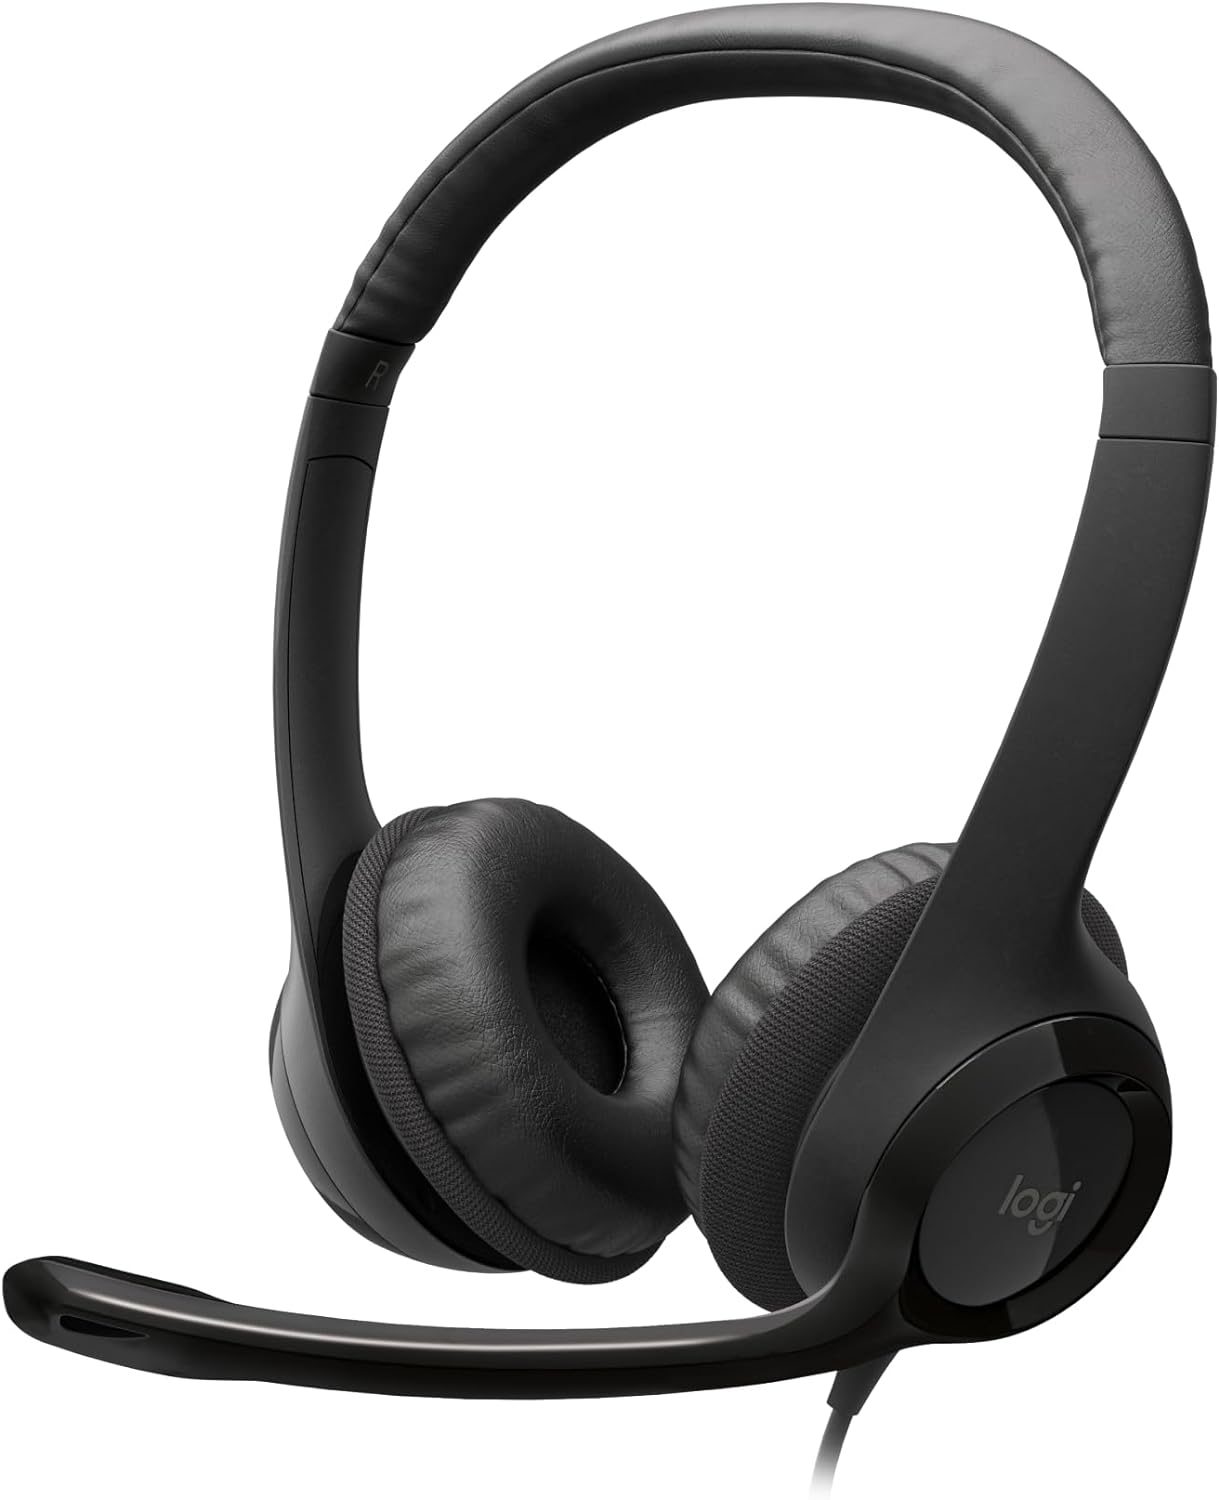 Logitech H390 Wired Headset, Stereo Headphones with Noise-Cancelling Microphone, USB, In-Line Controls, PC/Mac/Laptop - Black